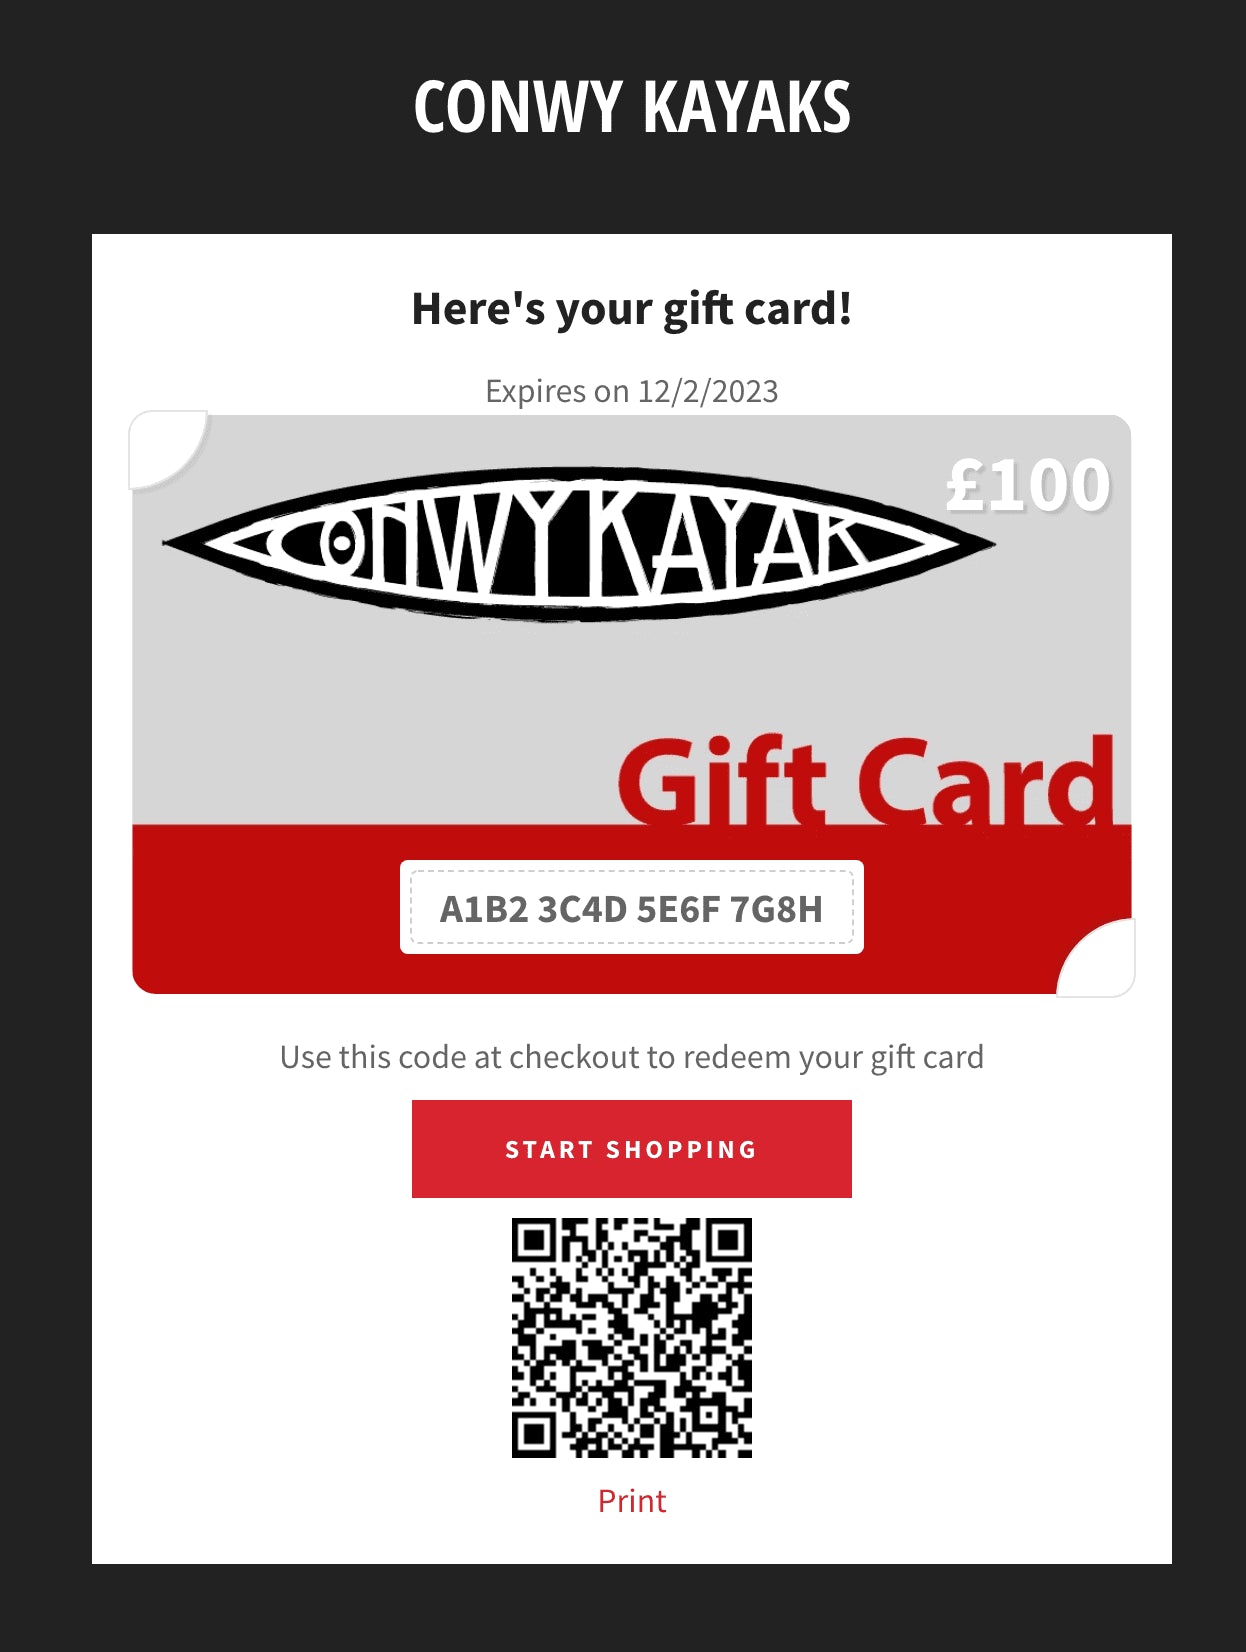 Conwy Kayaks Gift Cards | Conwy Kayaks